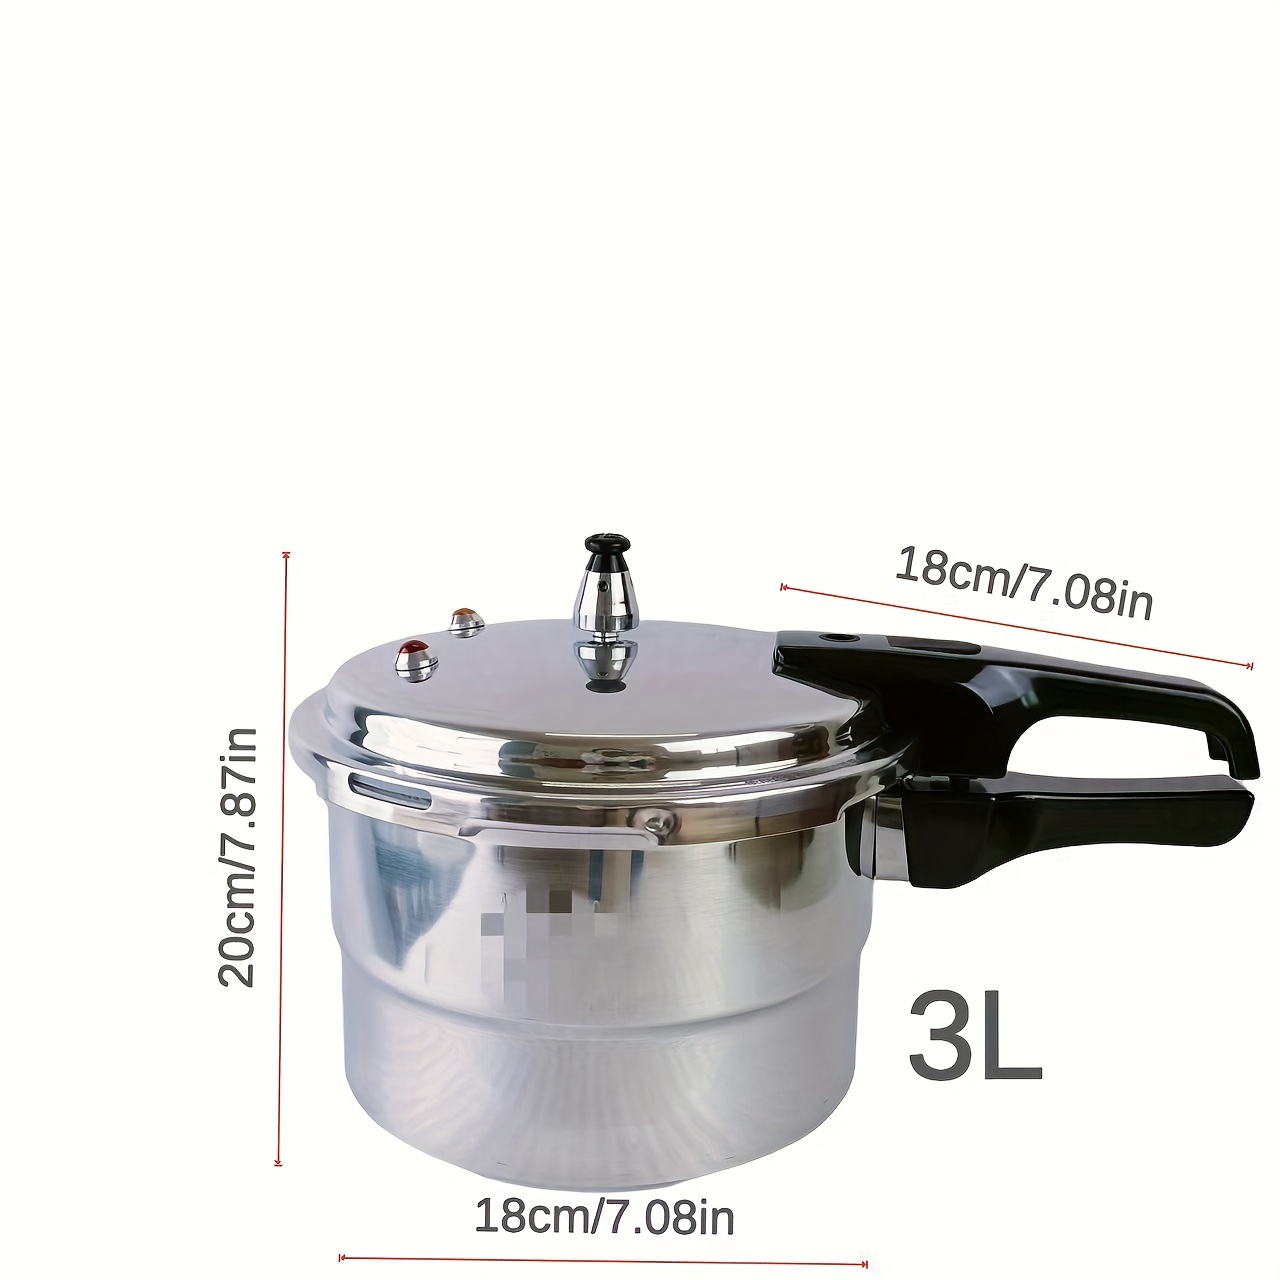 Pressure Cooker 4L Aluminum Alloy Fast Rice Cookers Dishwasher Safe  Cookware Pot for Kitchen Electric Induction Glass Gas Stove Canning Cooking  Cook,2pcs Steamer Rack as Gifts price in UAE,  UAE